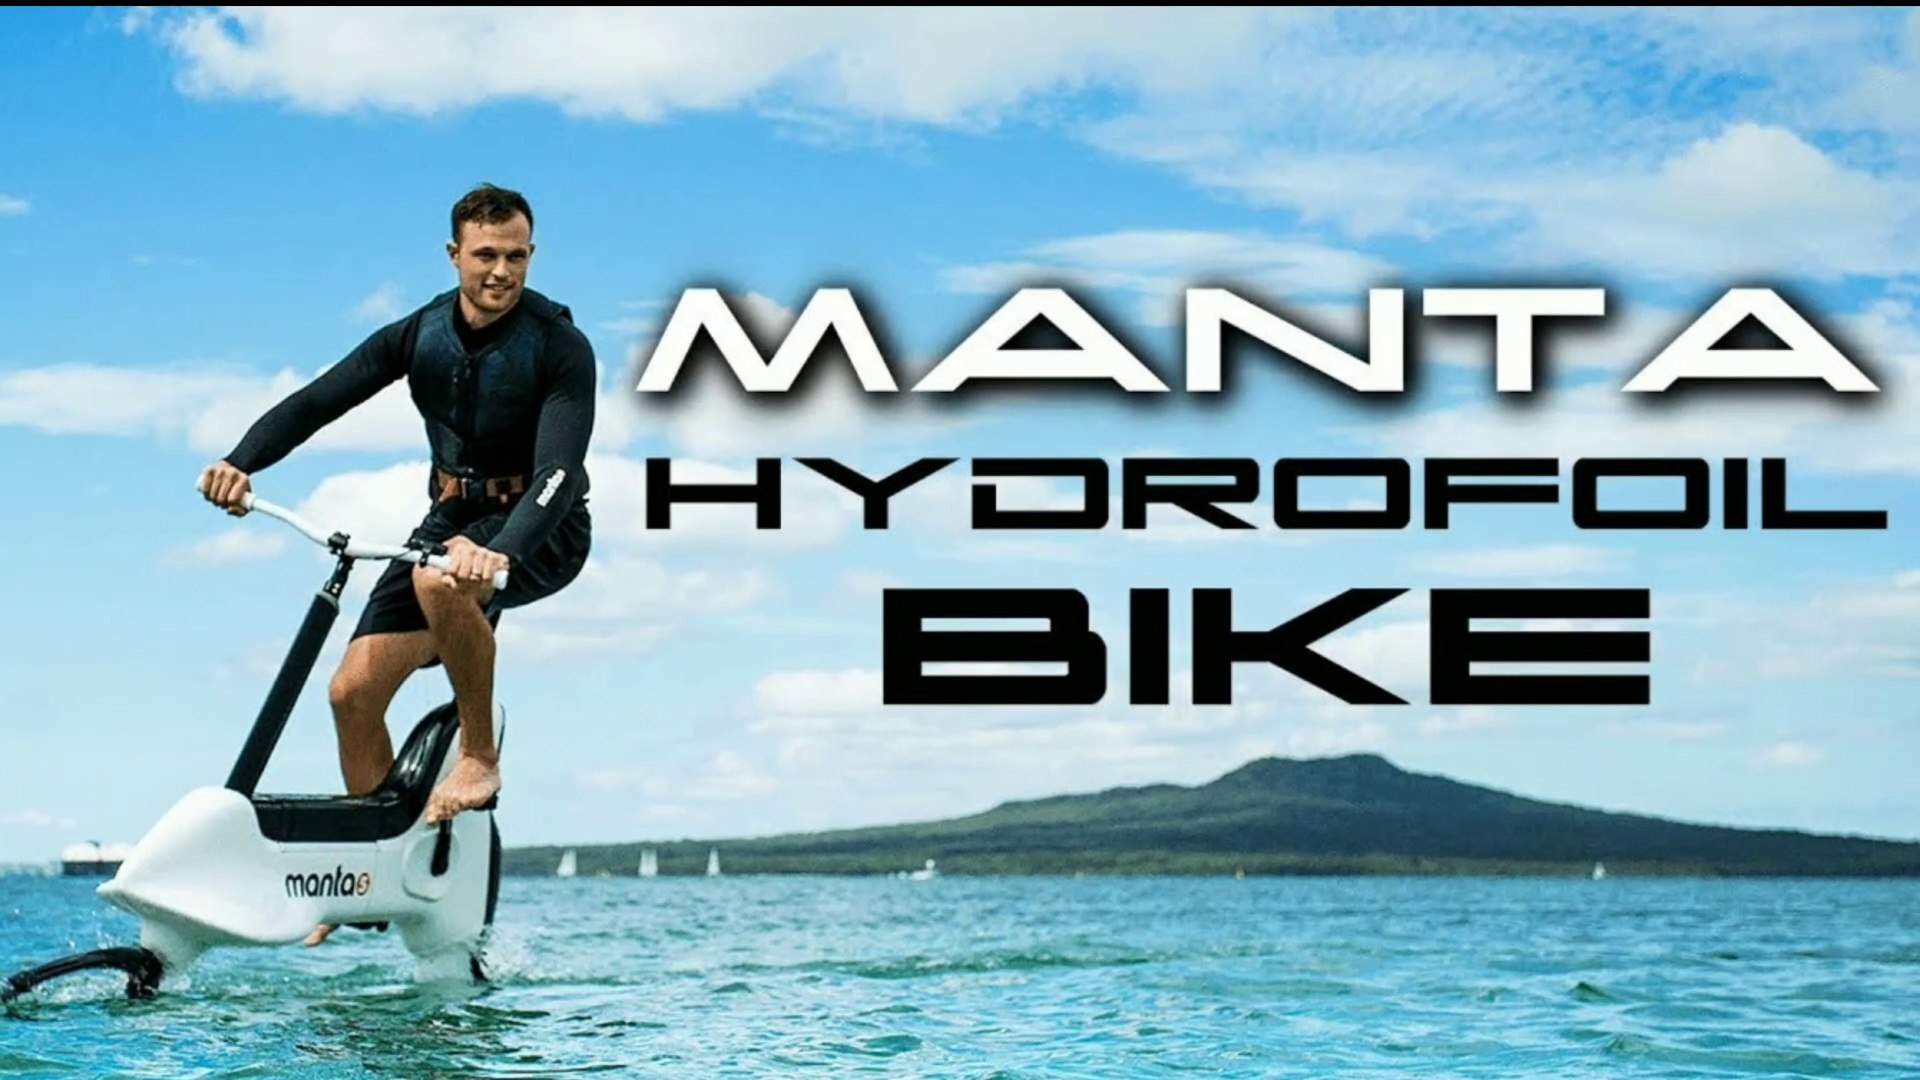 Manta5 hydrofoiler xe-1 | Electric water bike | Ces 2020 launch |  Specifications | Price - video Dailymotion